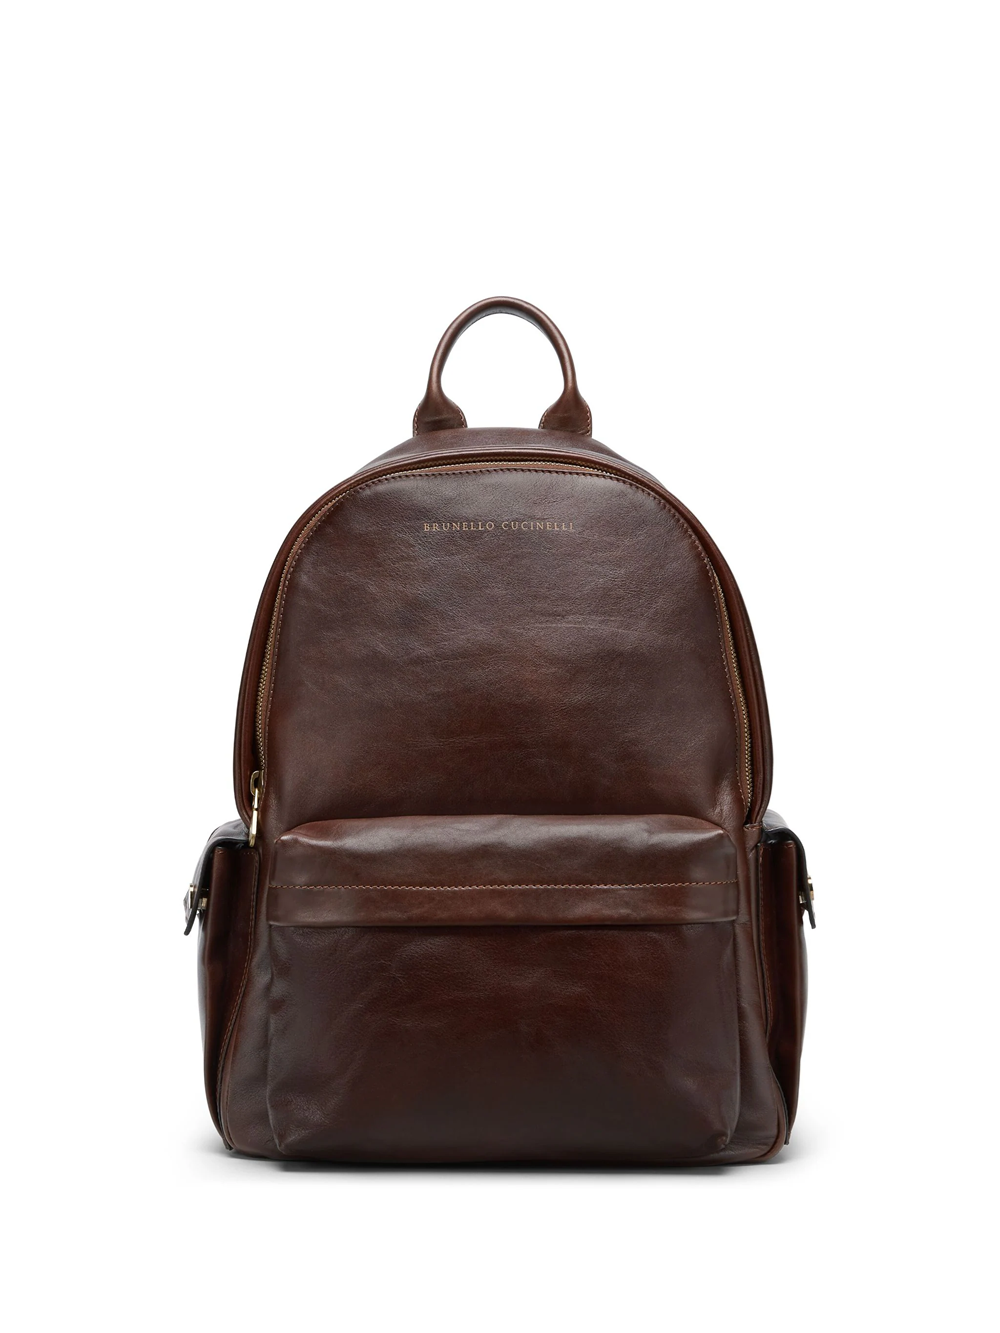 Brunello Cucinelli Backpack With Print In Brown